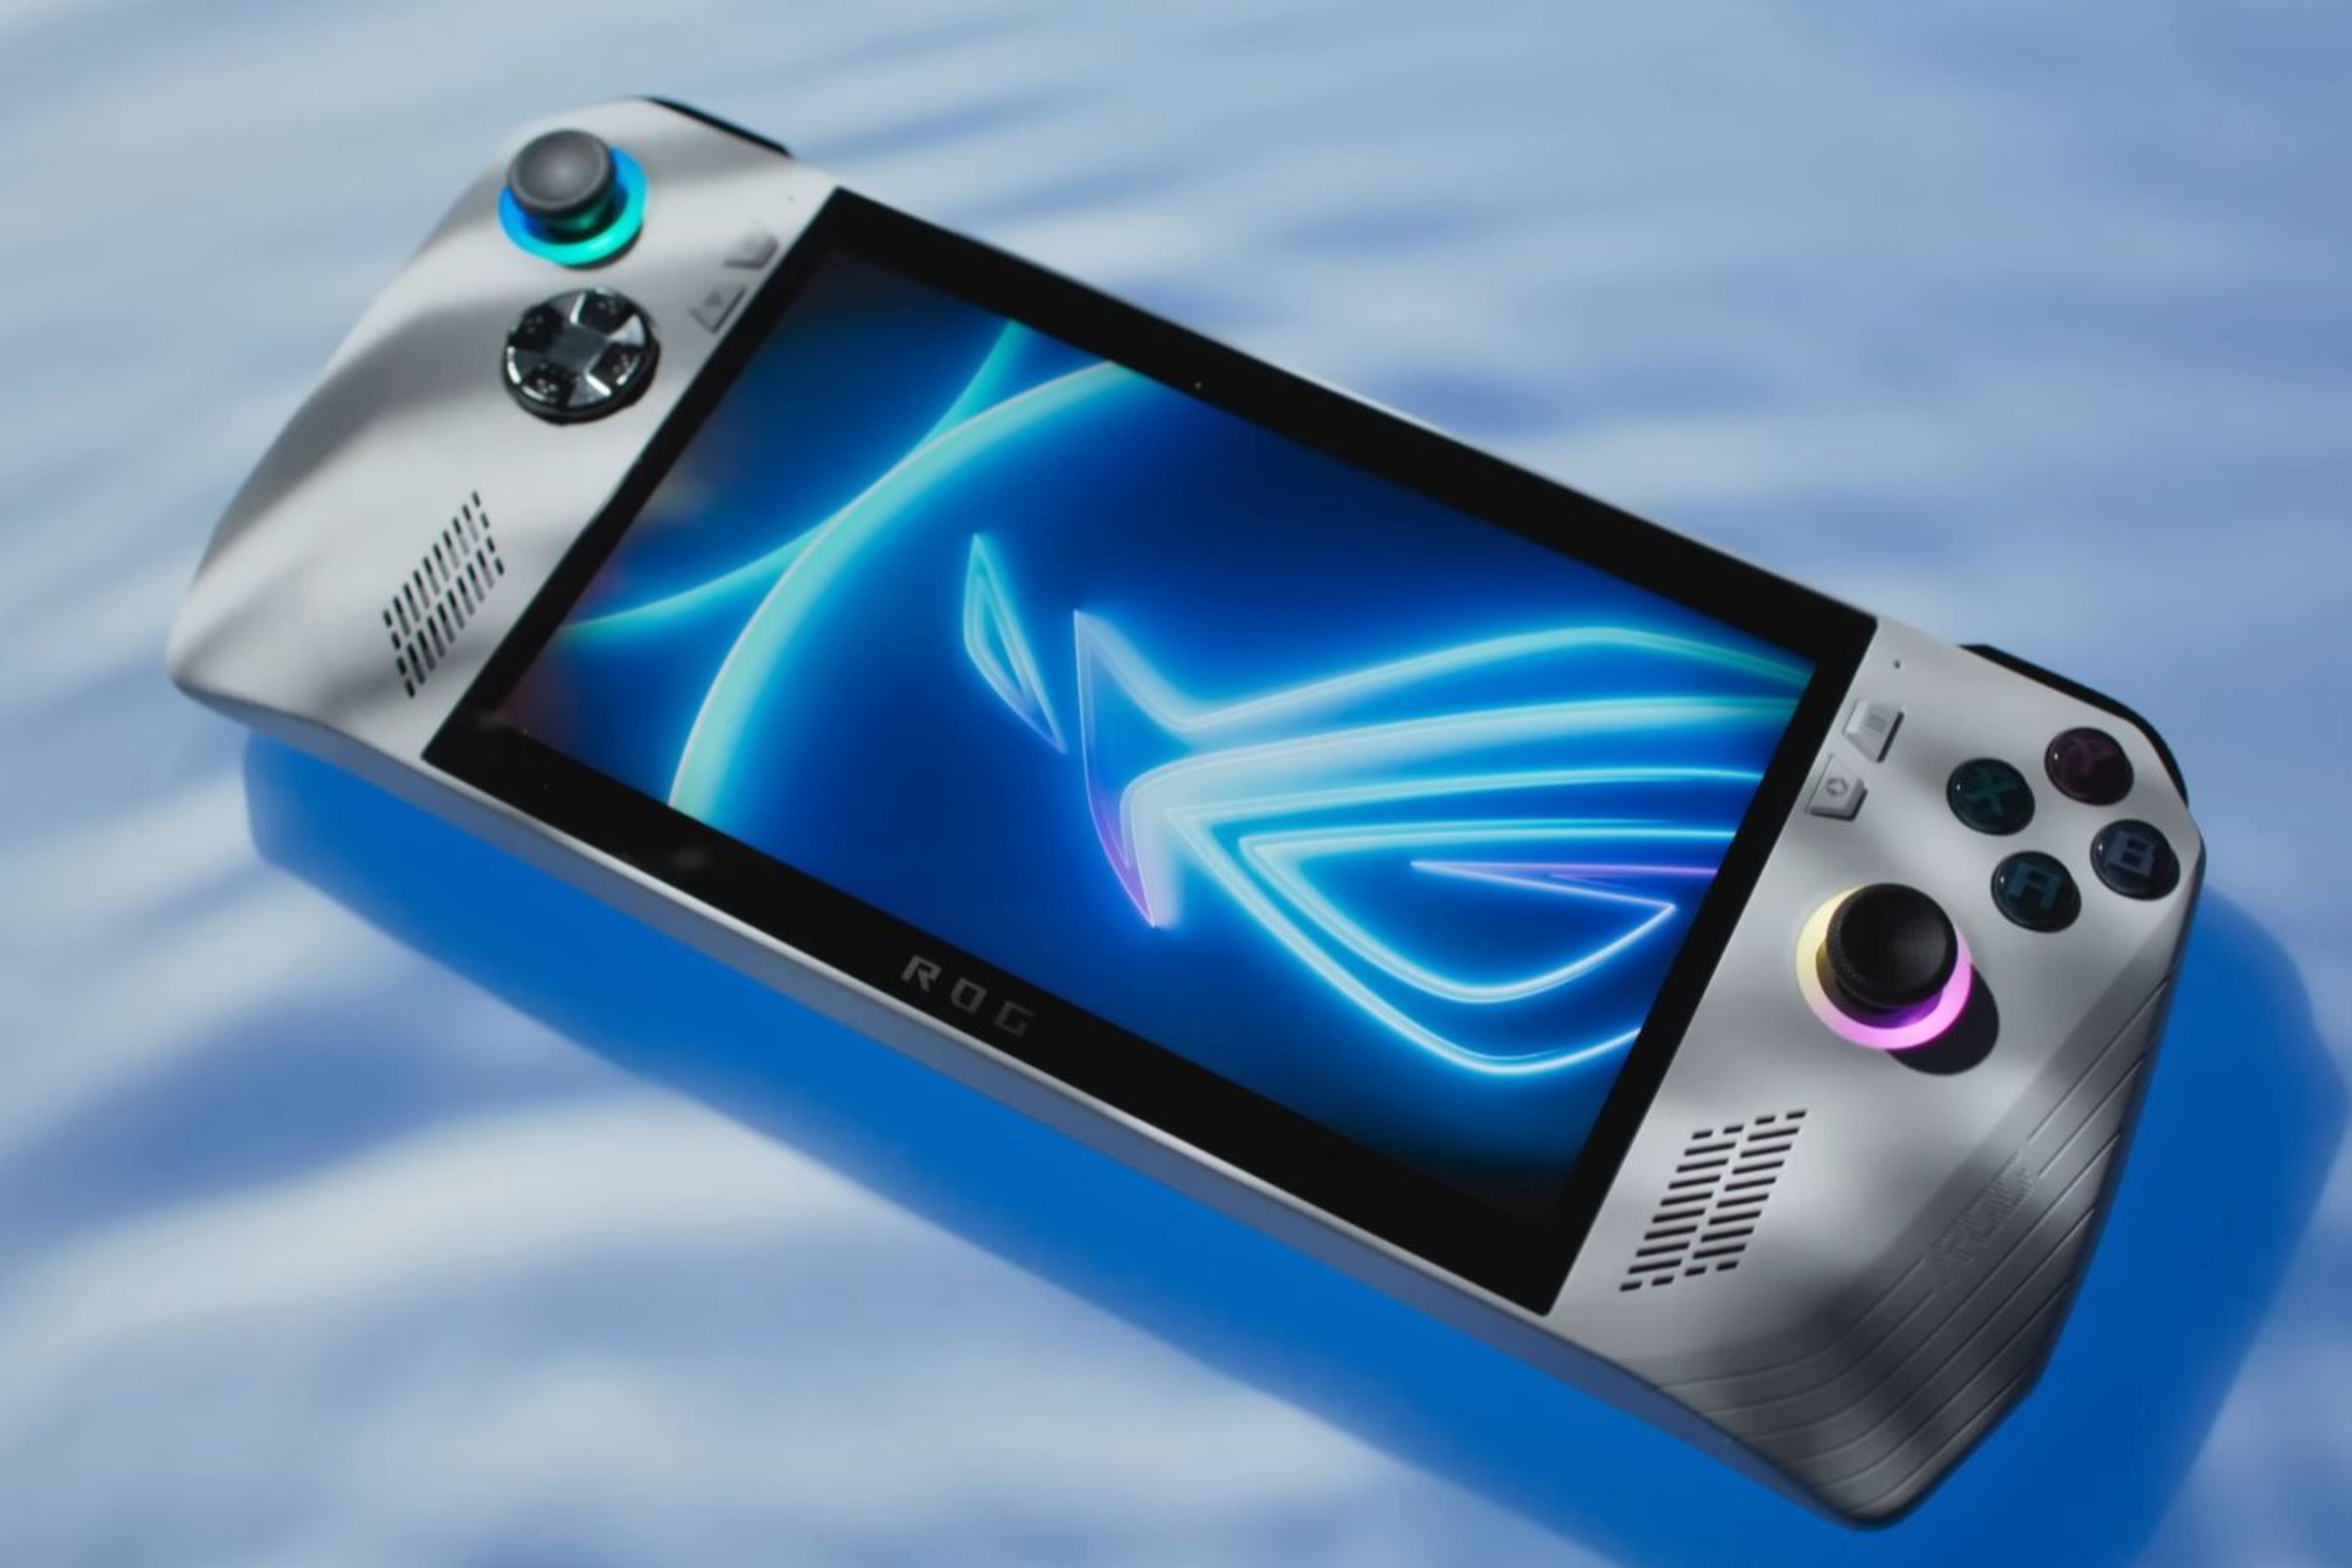 Image showing Asus ROG Ally handheld gaming PC, with a white casing and a light blue background.